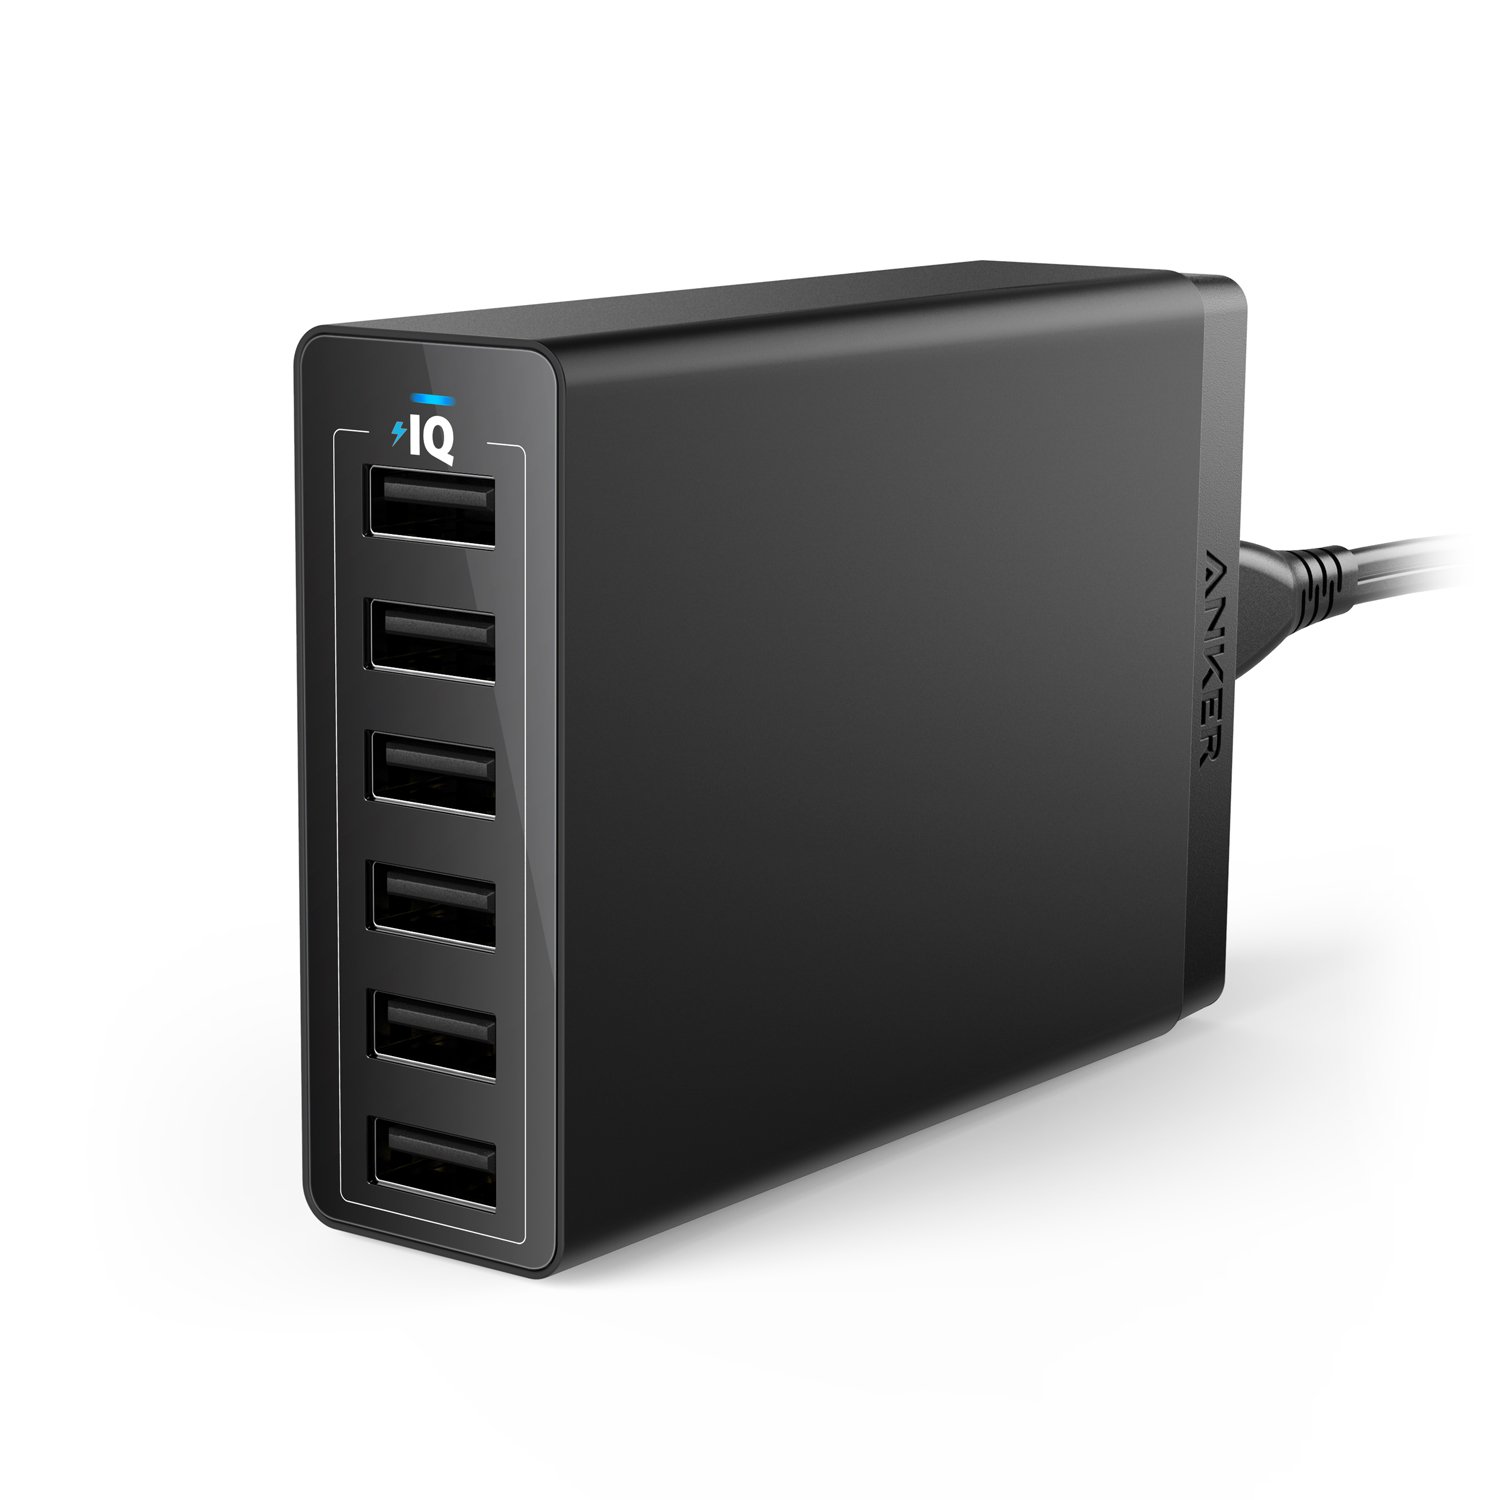 Anker PowerPort 6 60W Wall Charger, 6 USB Ports, High-Speed Charging with PowerIQ and VoltageBoost